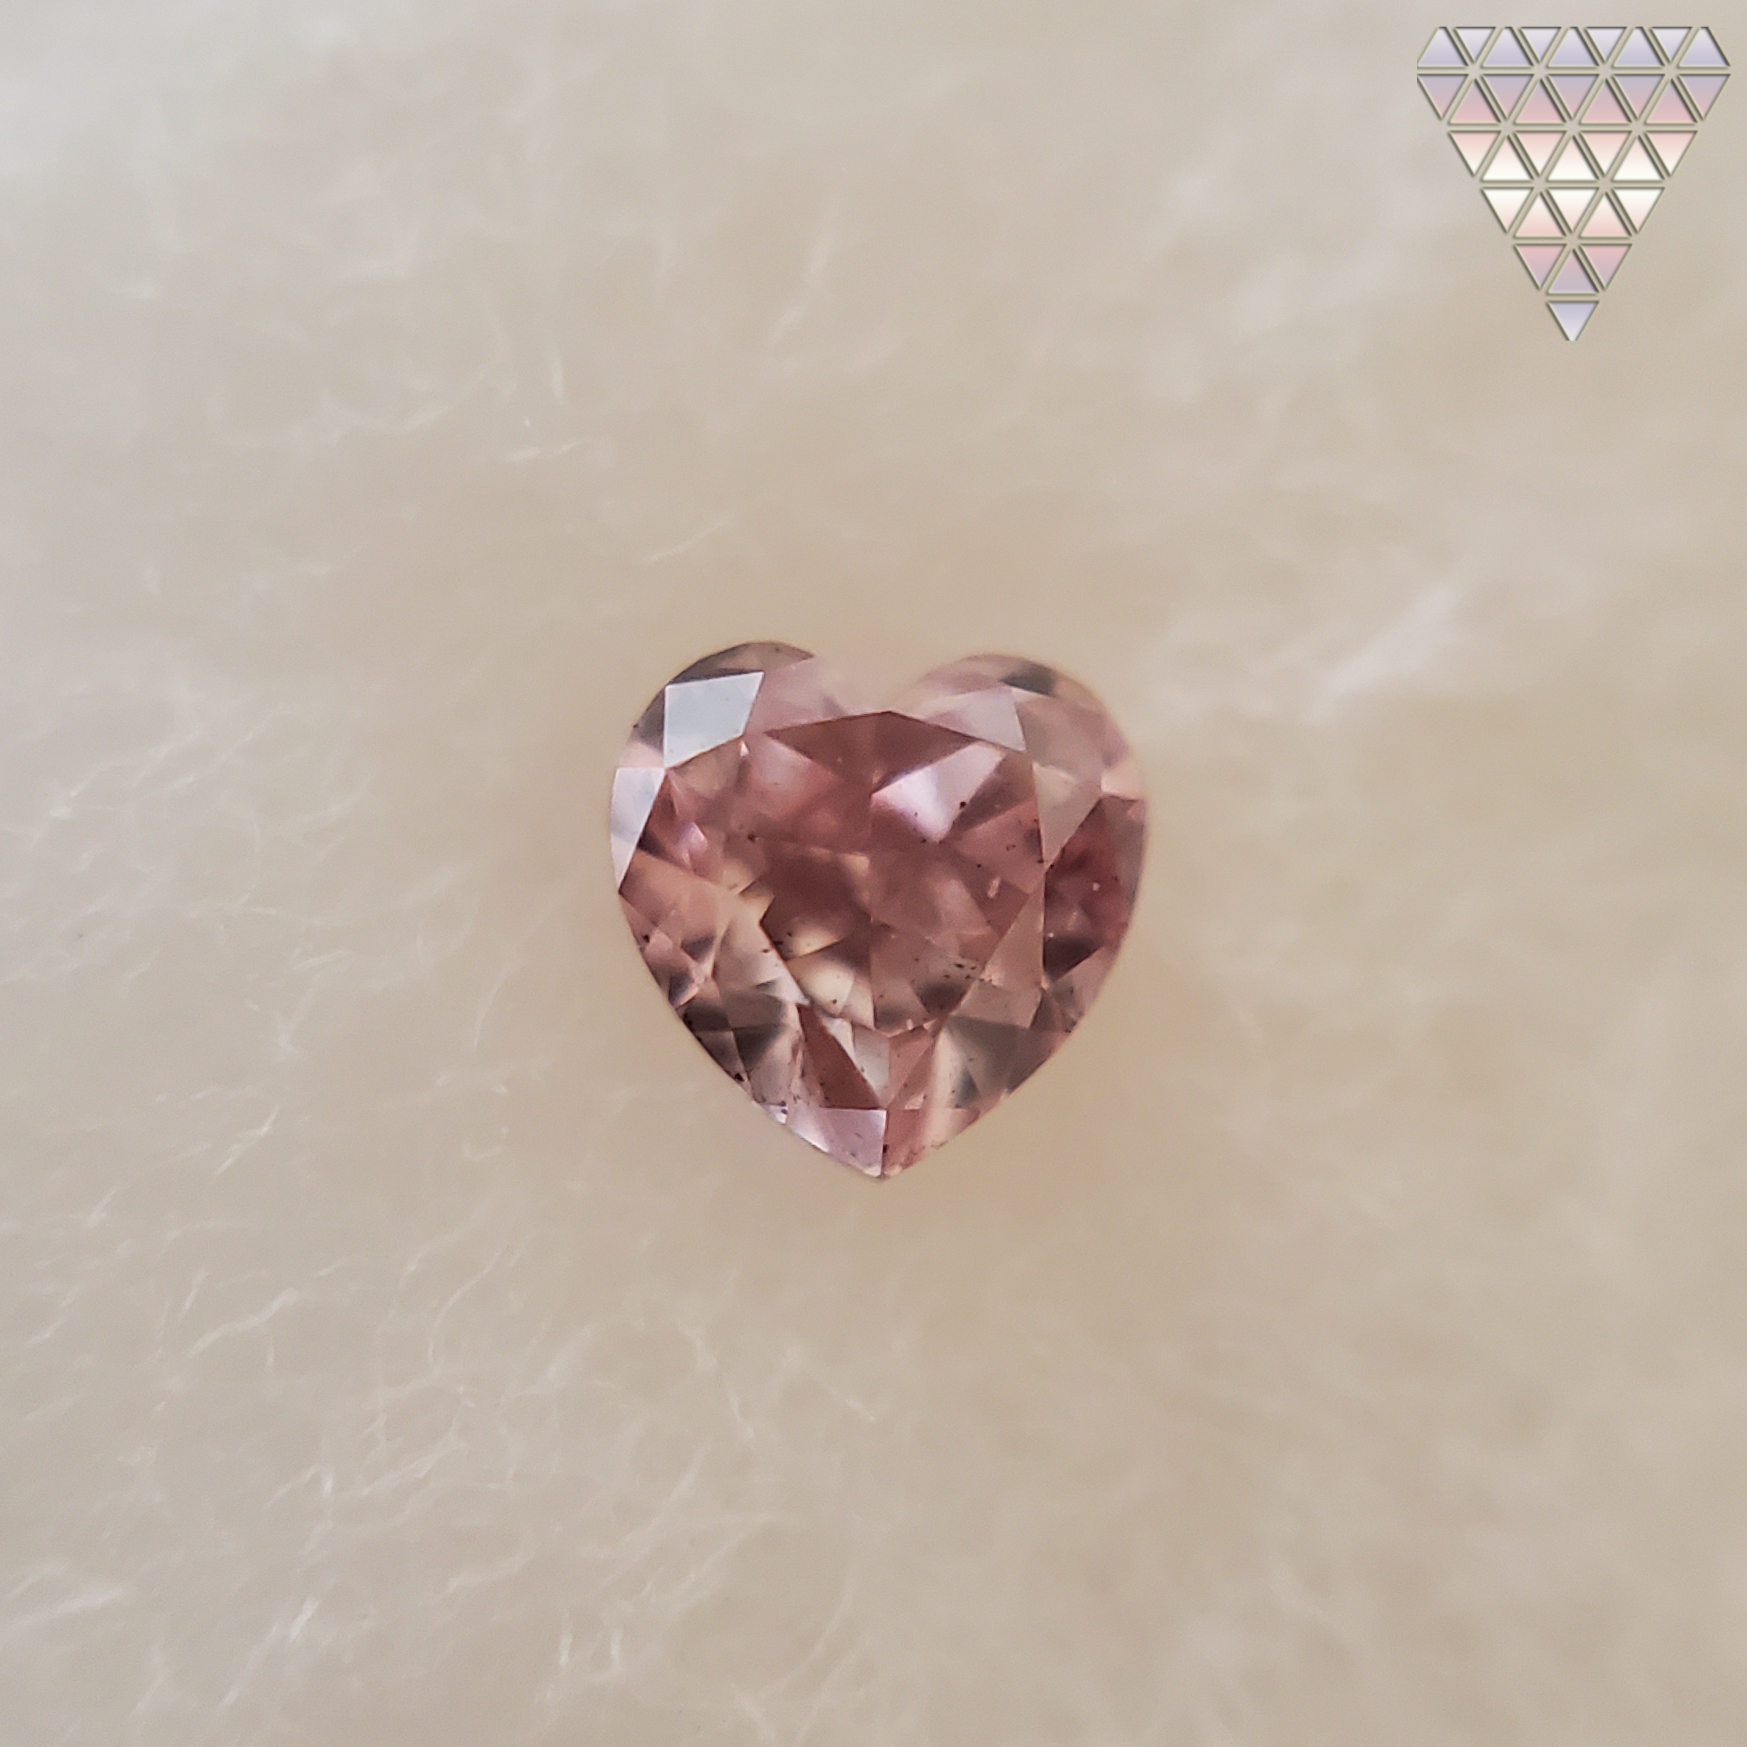 0.093 Ct Fancy Pink Si1 Heart AGT Japan Natural Loose Diamond Exchange Federation 6